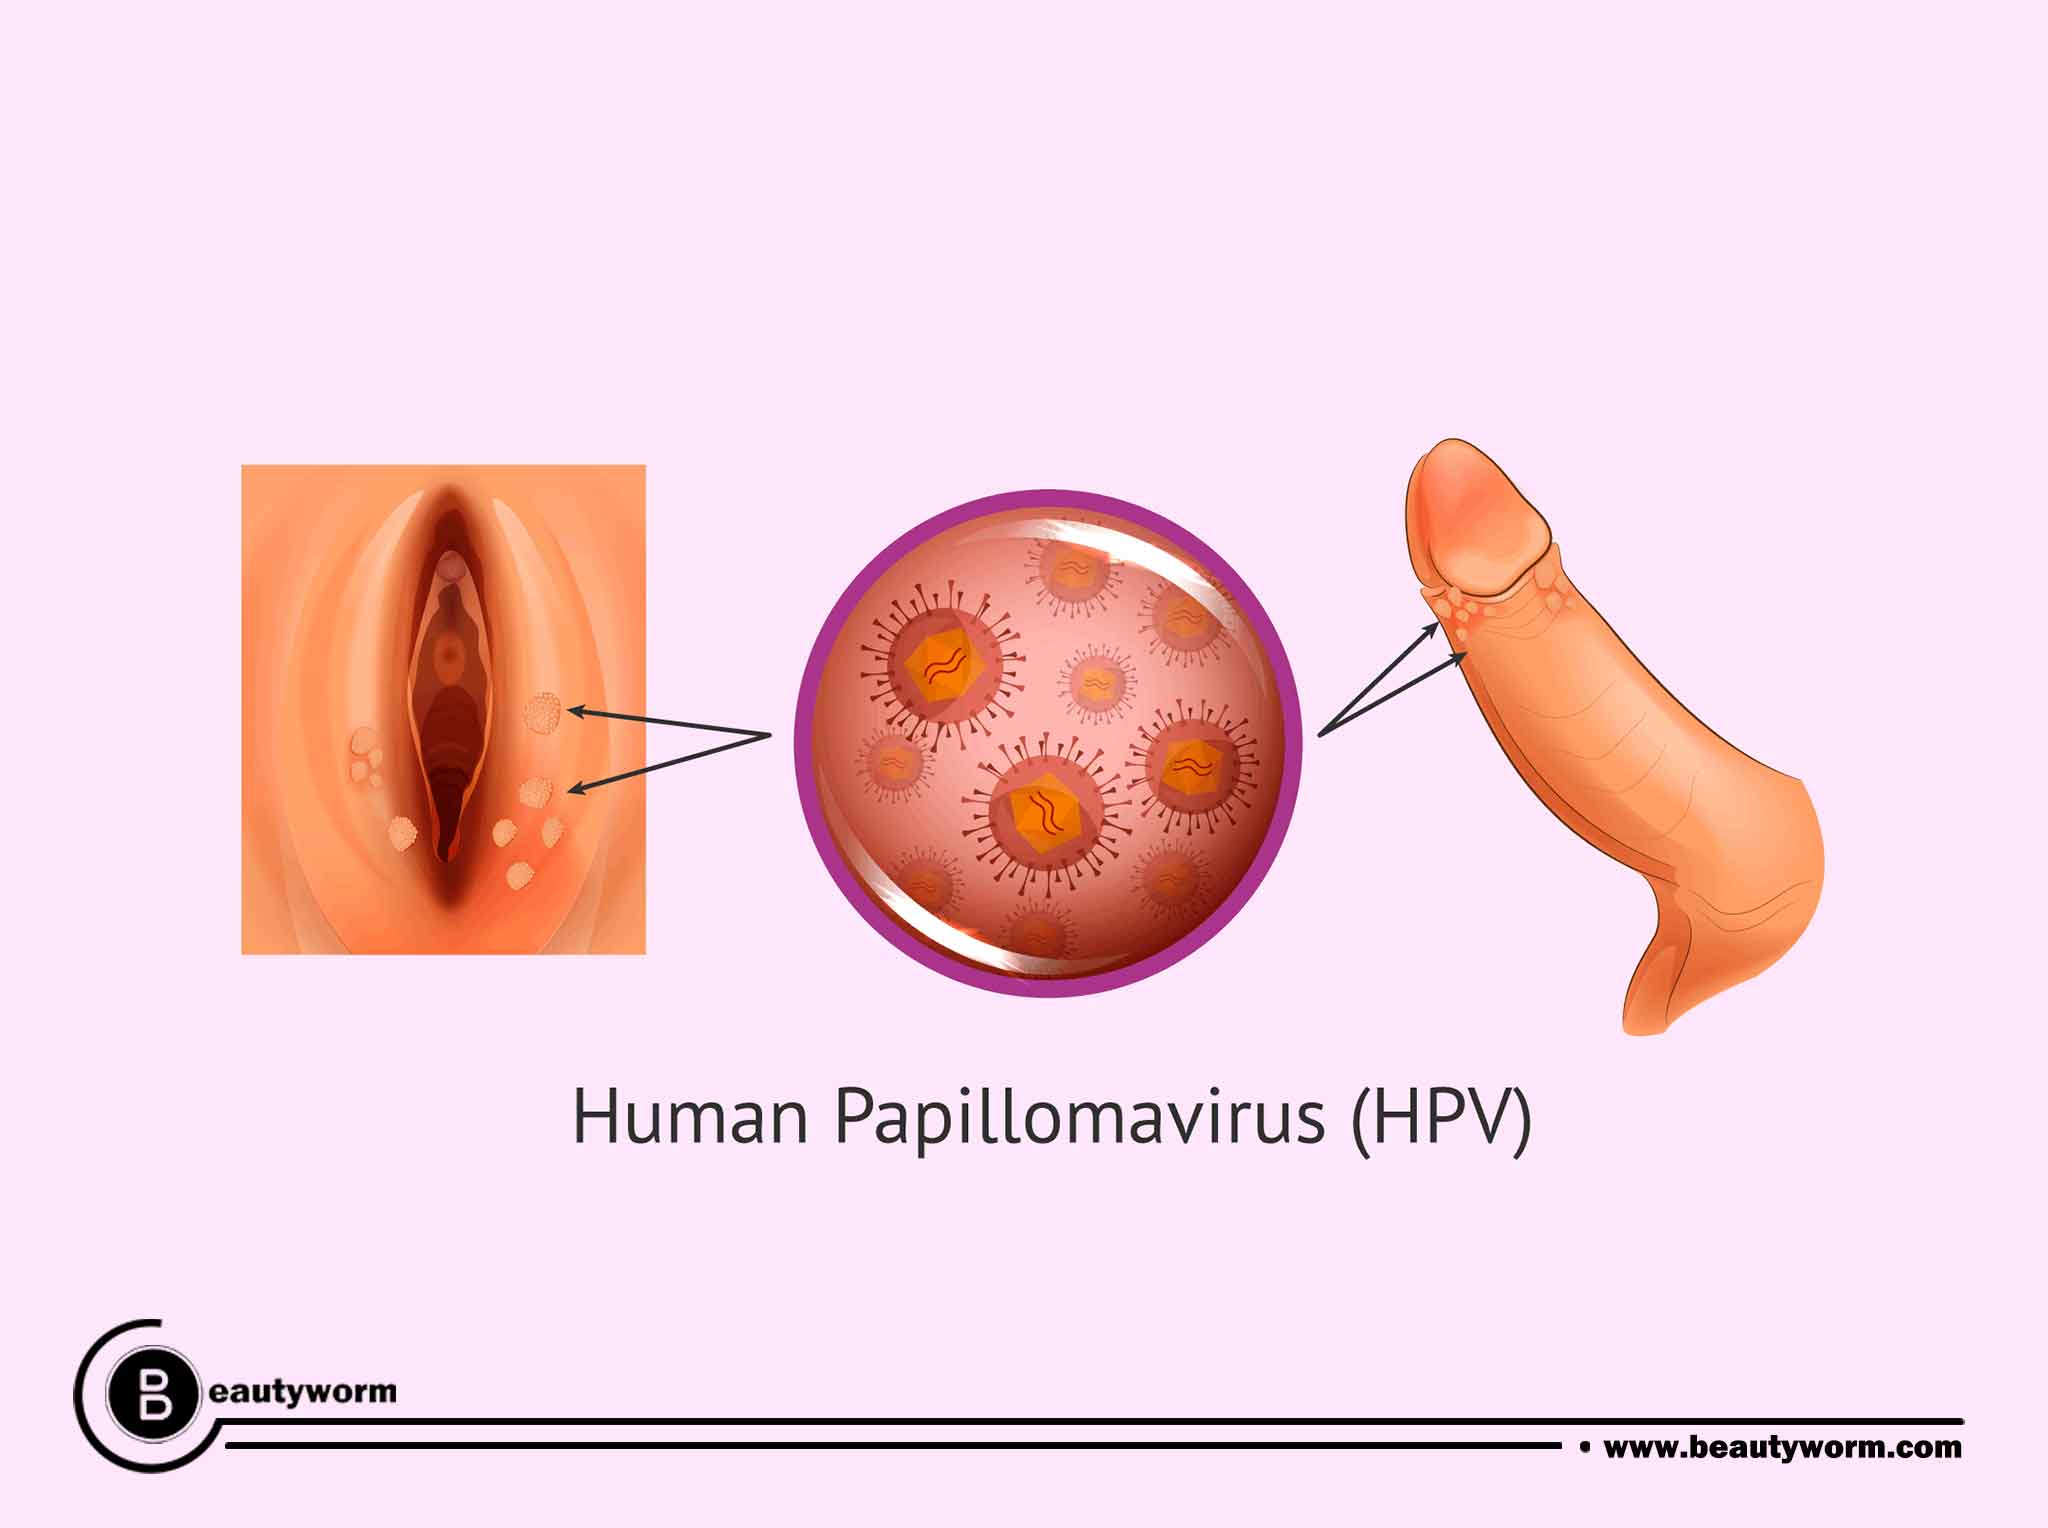 How is HPV spread?